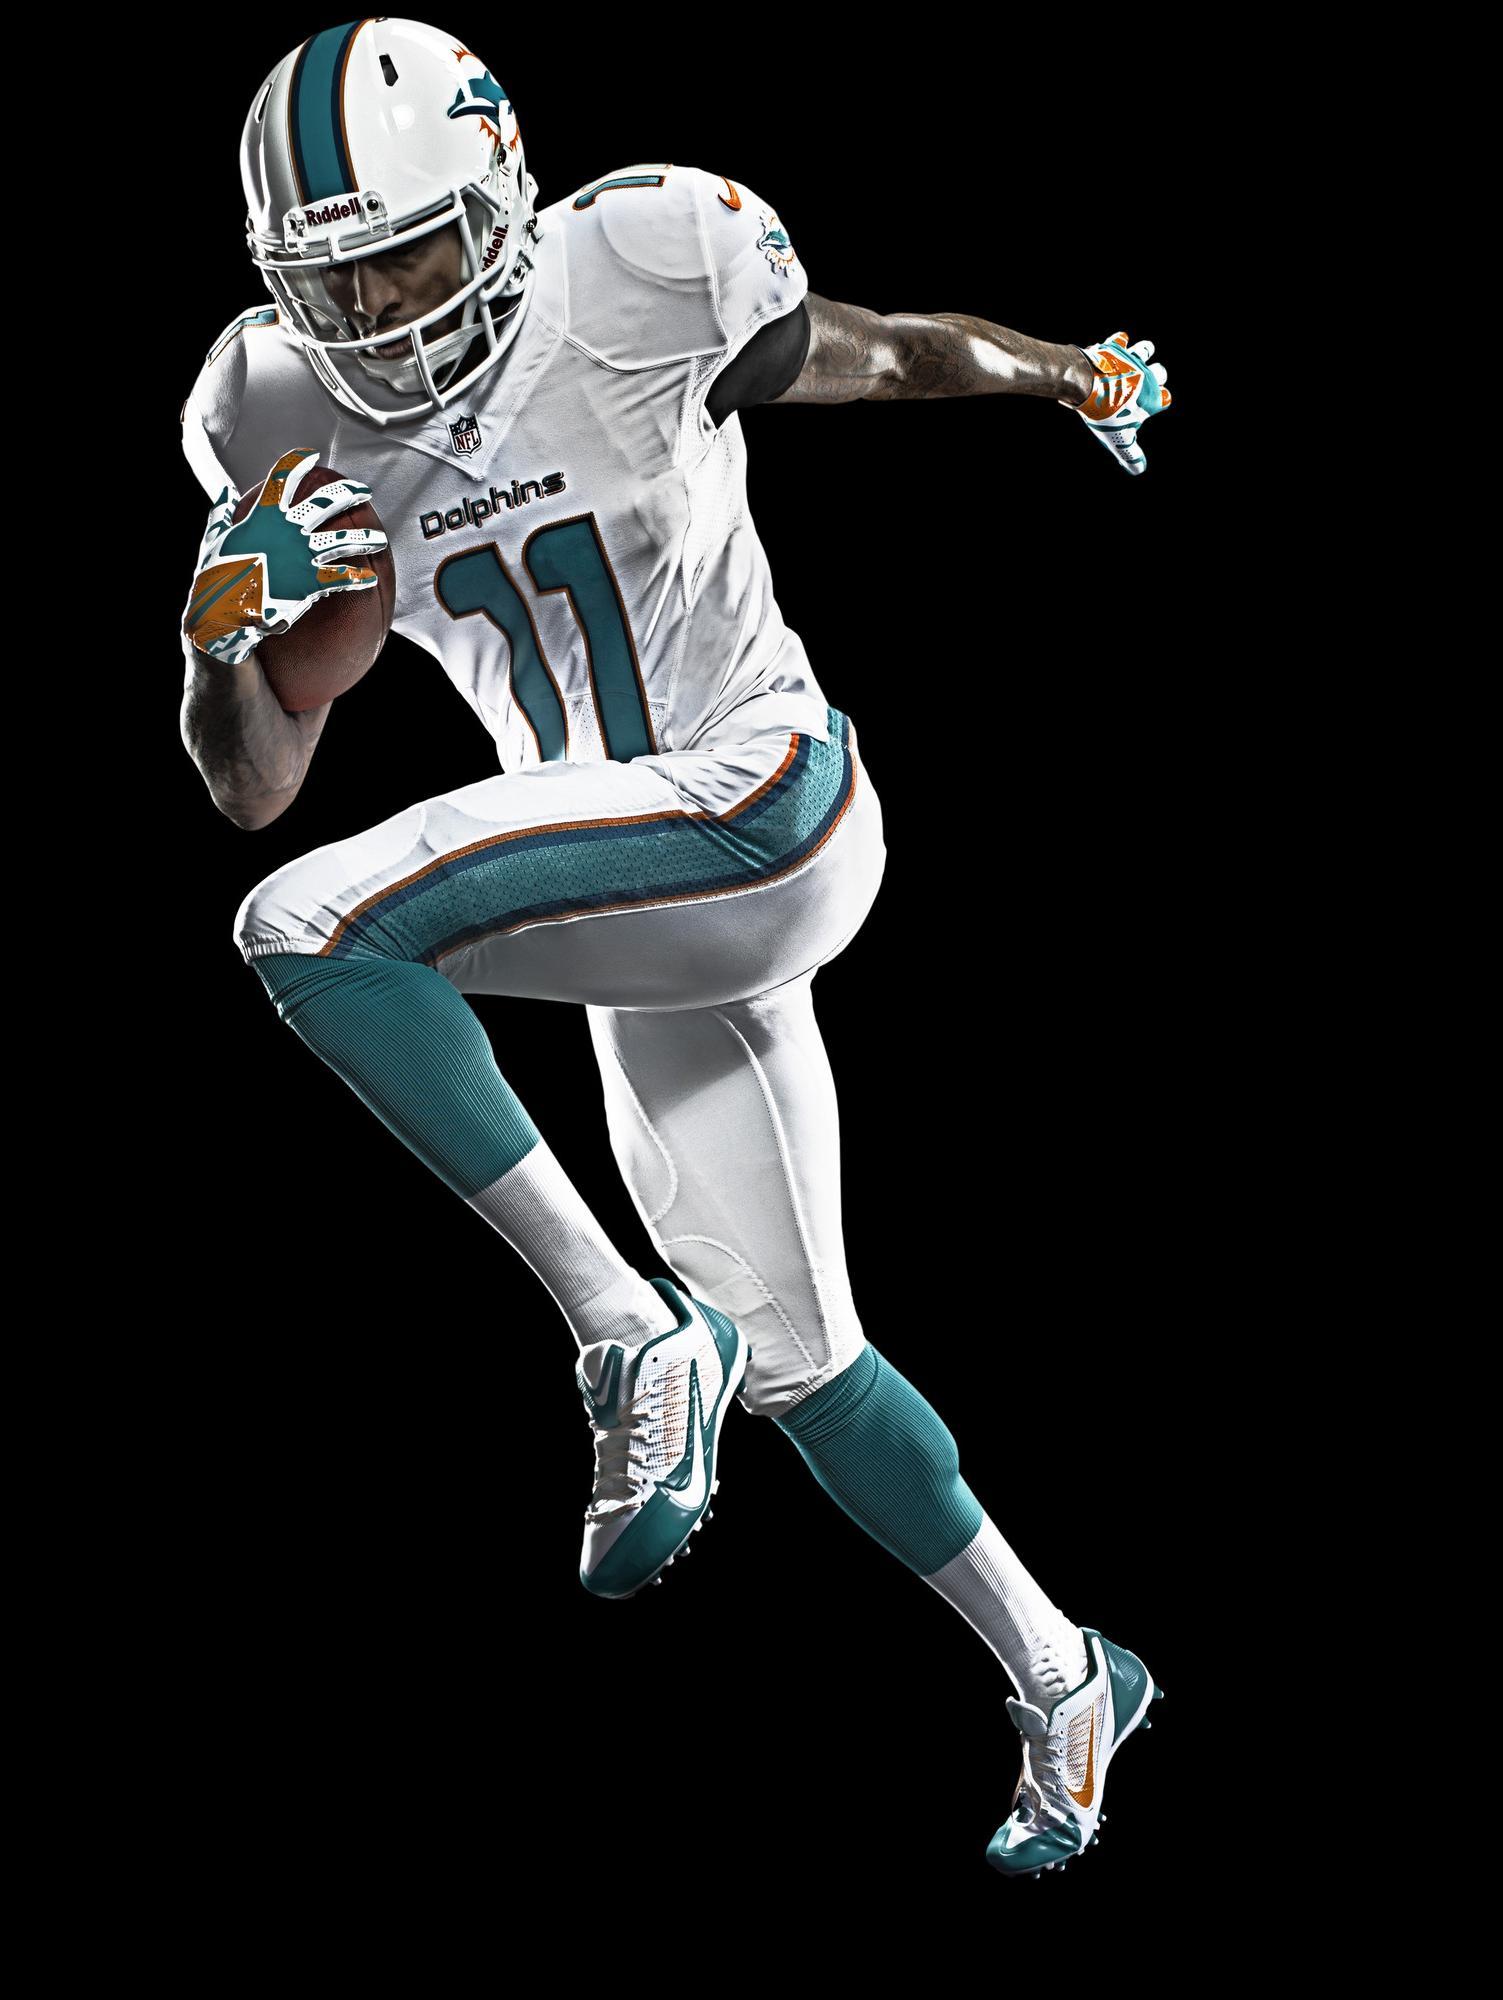 HQ Photo of Mike Wallace in a Phins Uniform